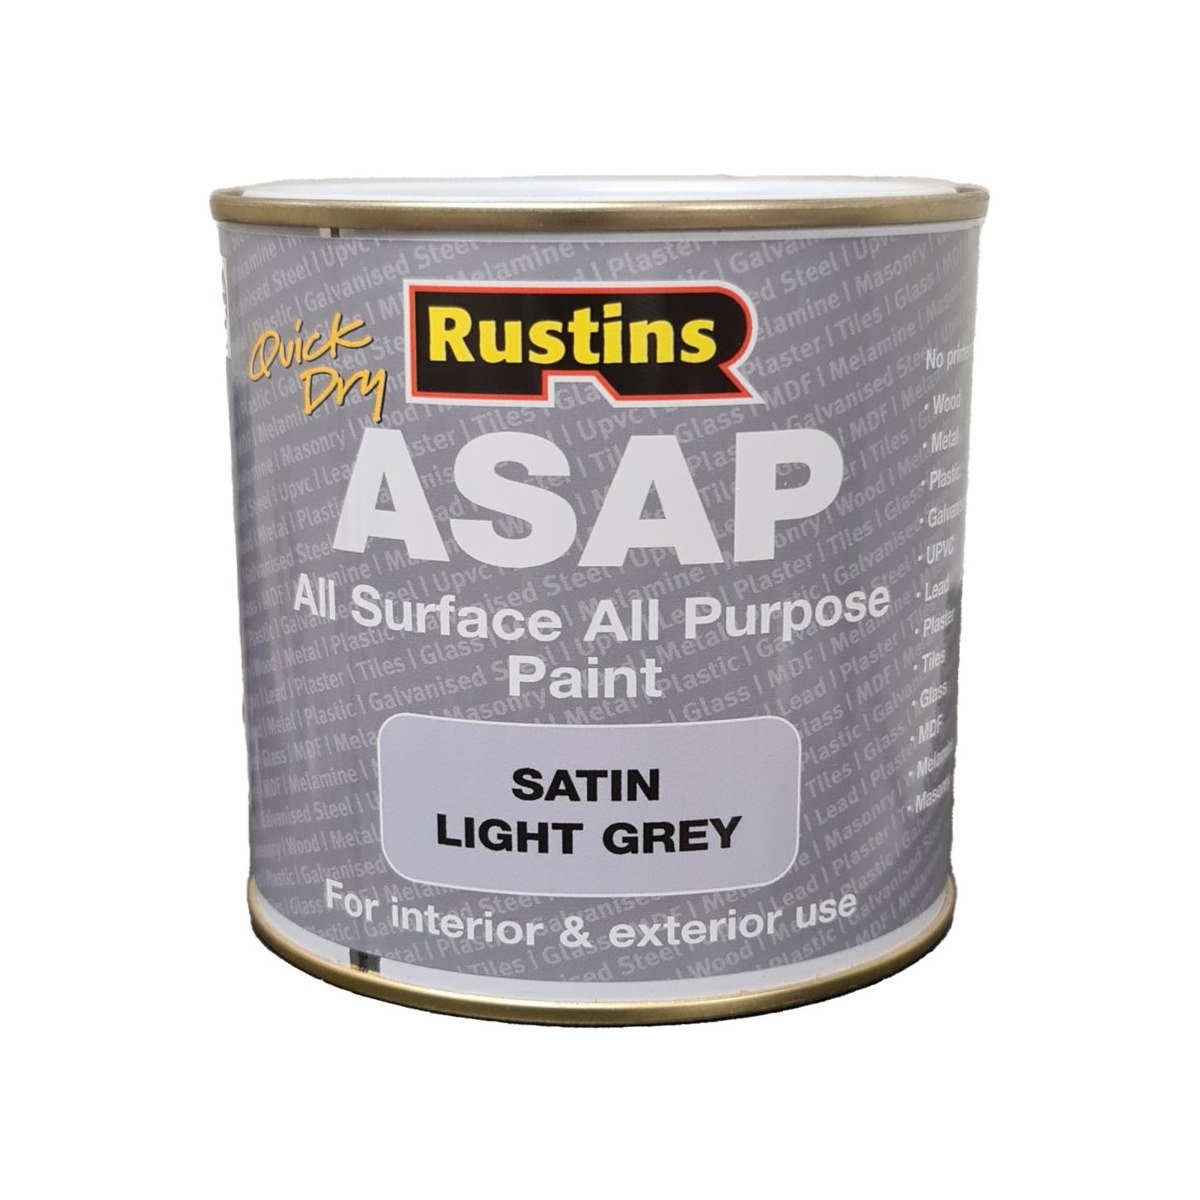 Rustins Quick Dry All Surface All Purpose Paint (ASAP) Light Grey 1 Litre